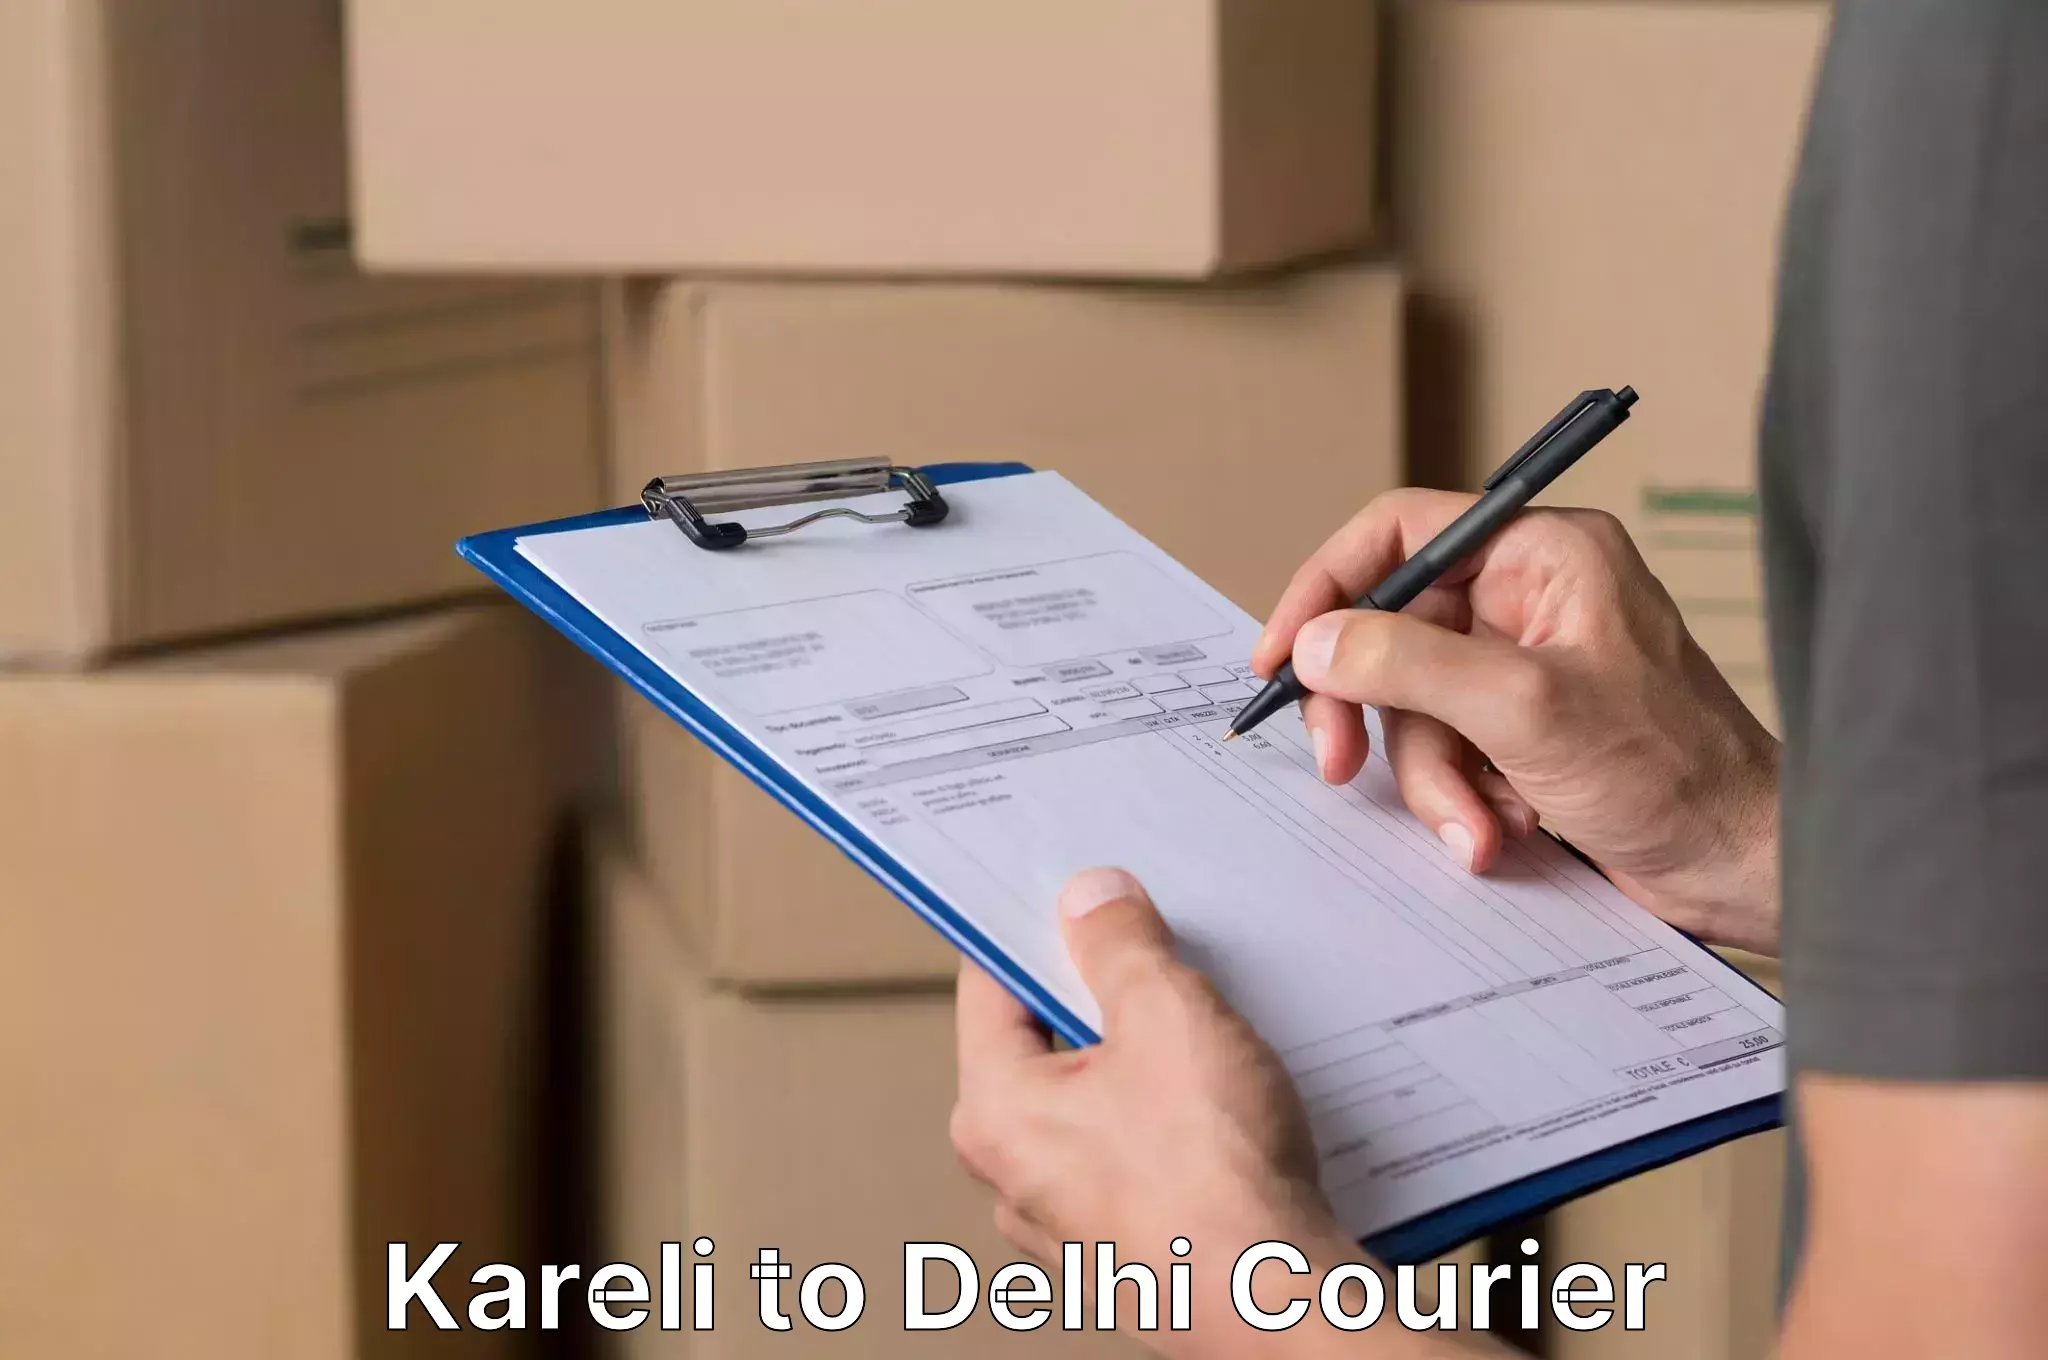 Furniture relocation experts Kareli to NCR